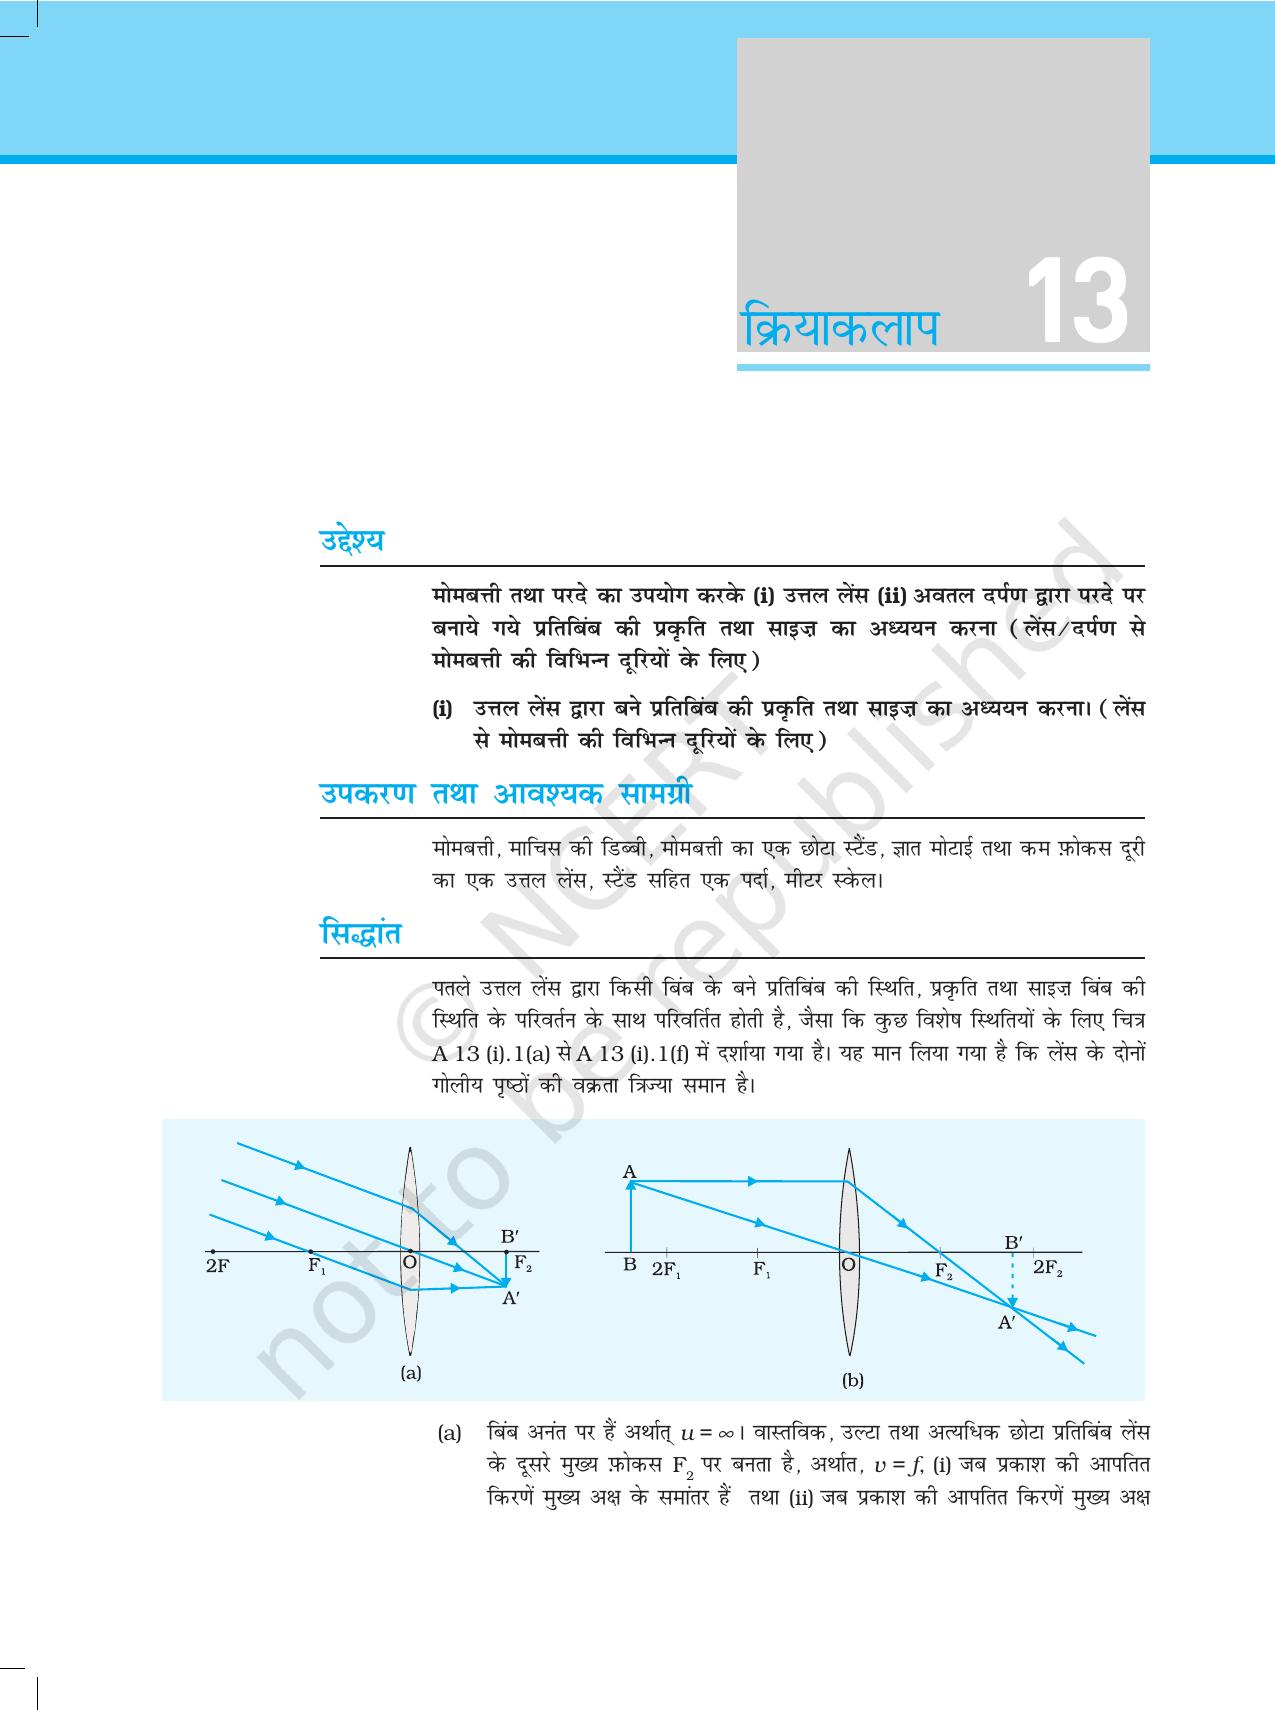 NCERT Laboratory Manuals for Class XII भौतिकी - क्रियाकलाप (12 - 14) - Page 3